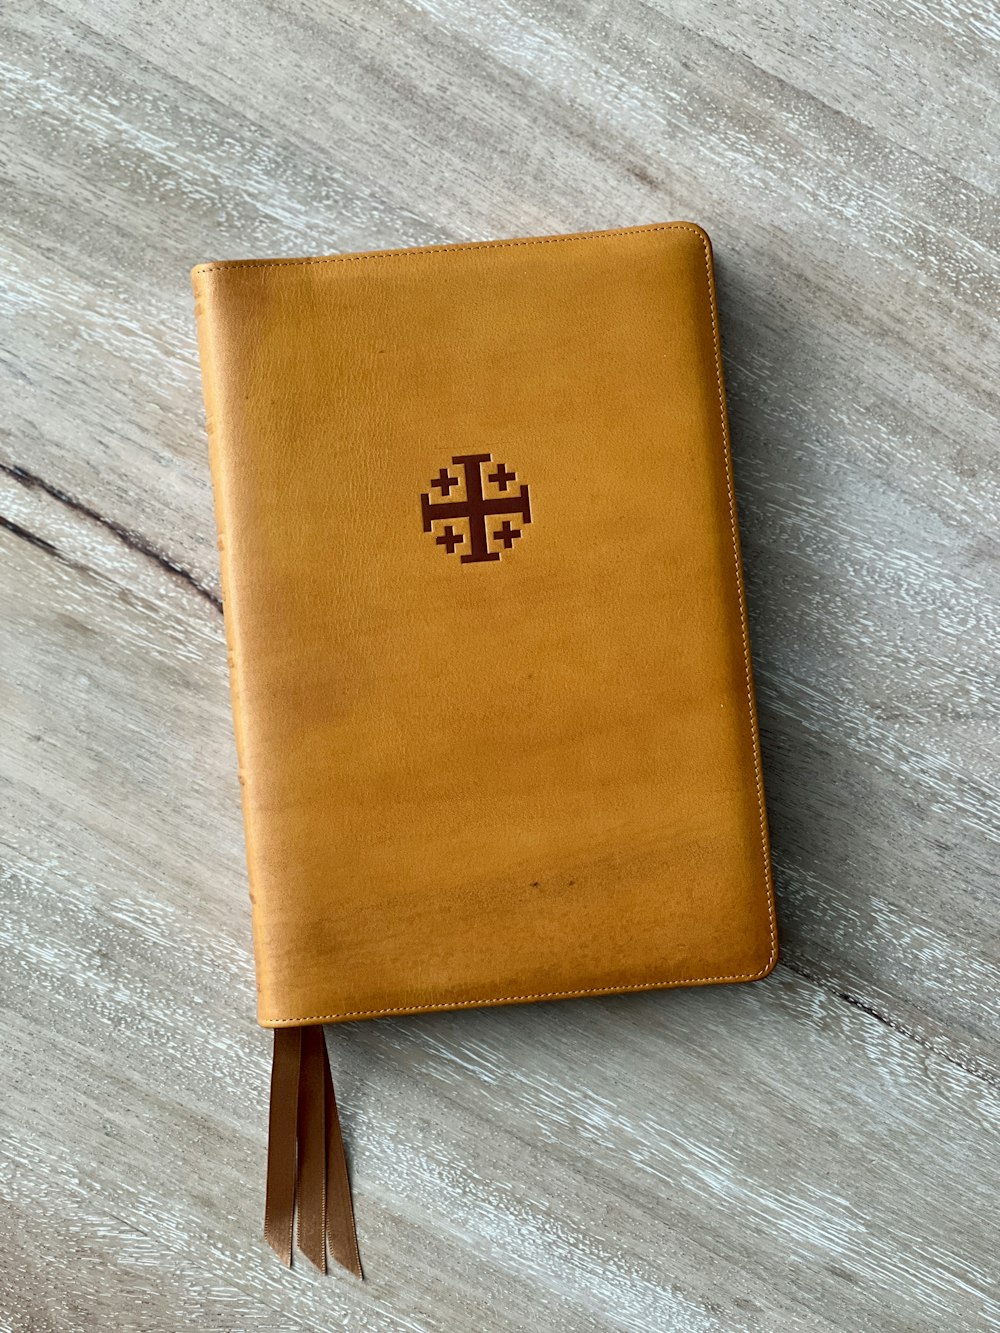 a brown leather journal with a cross on it